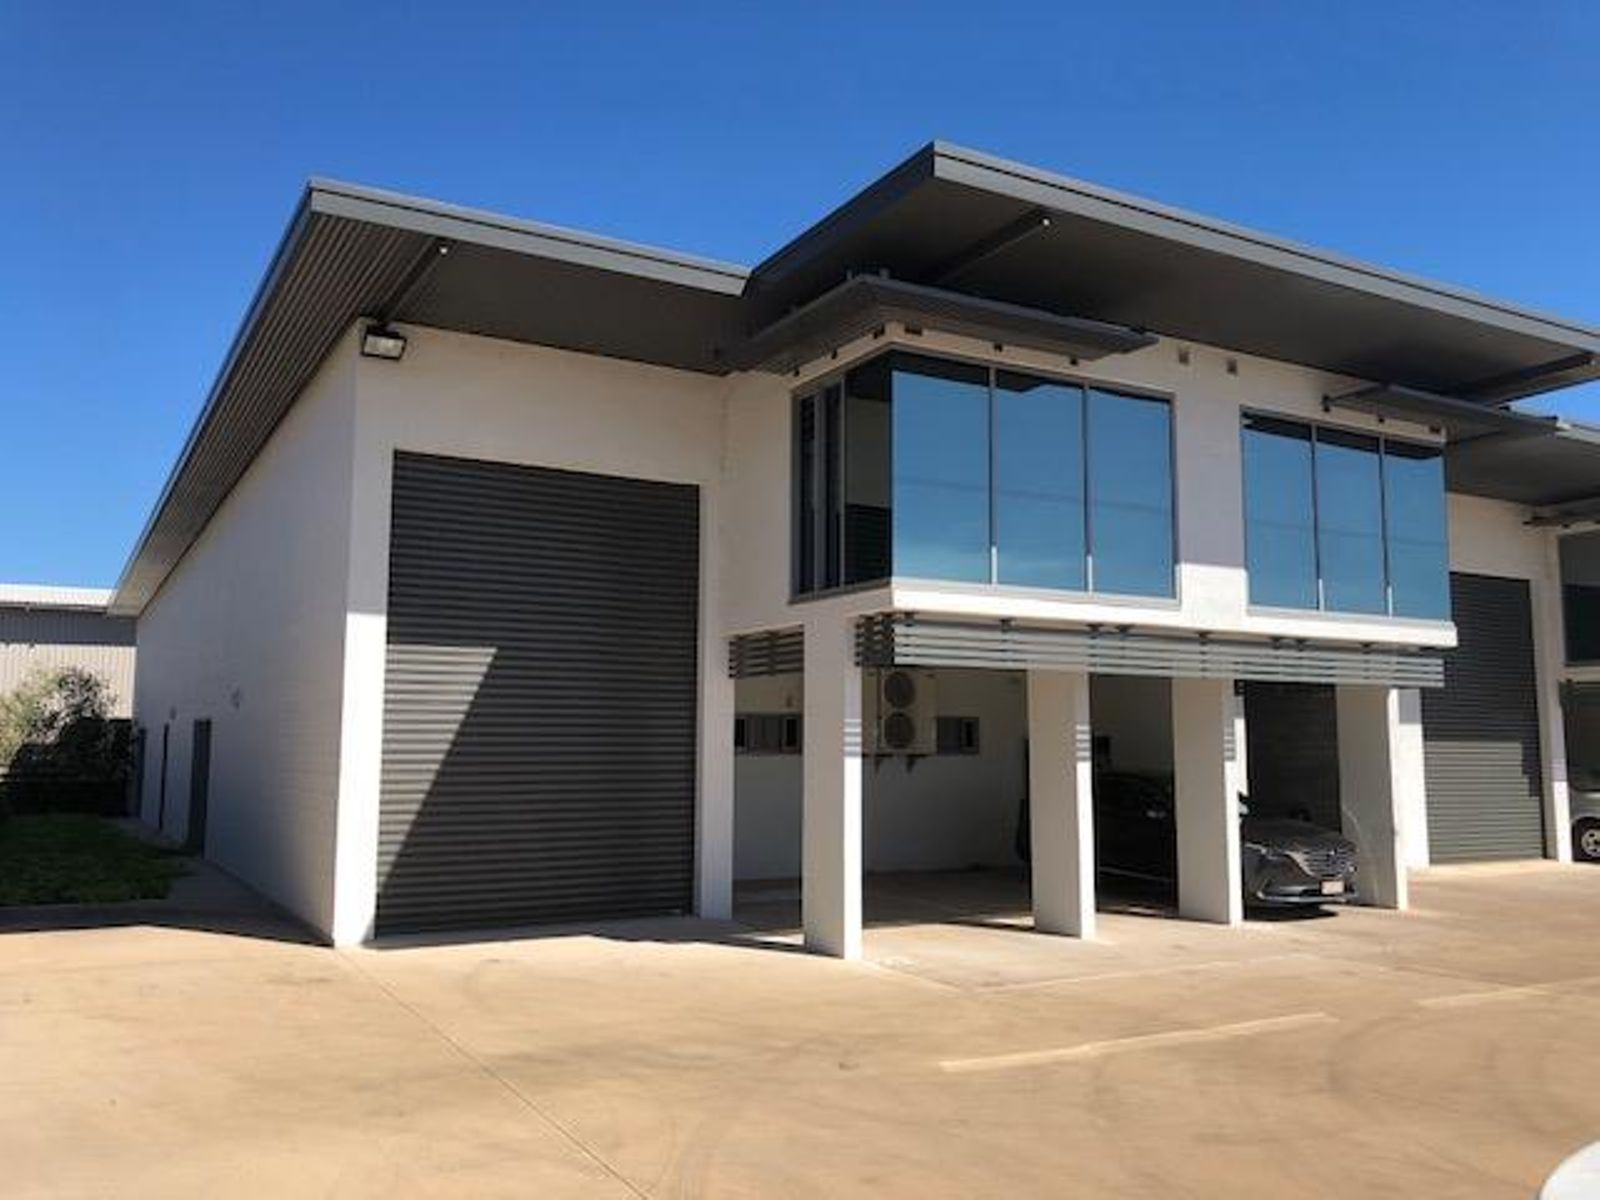 1 Office For Sale in Angurugu, NT 0822